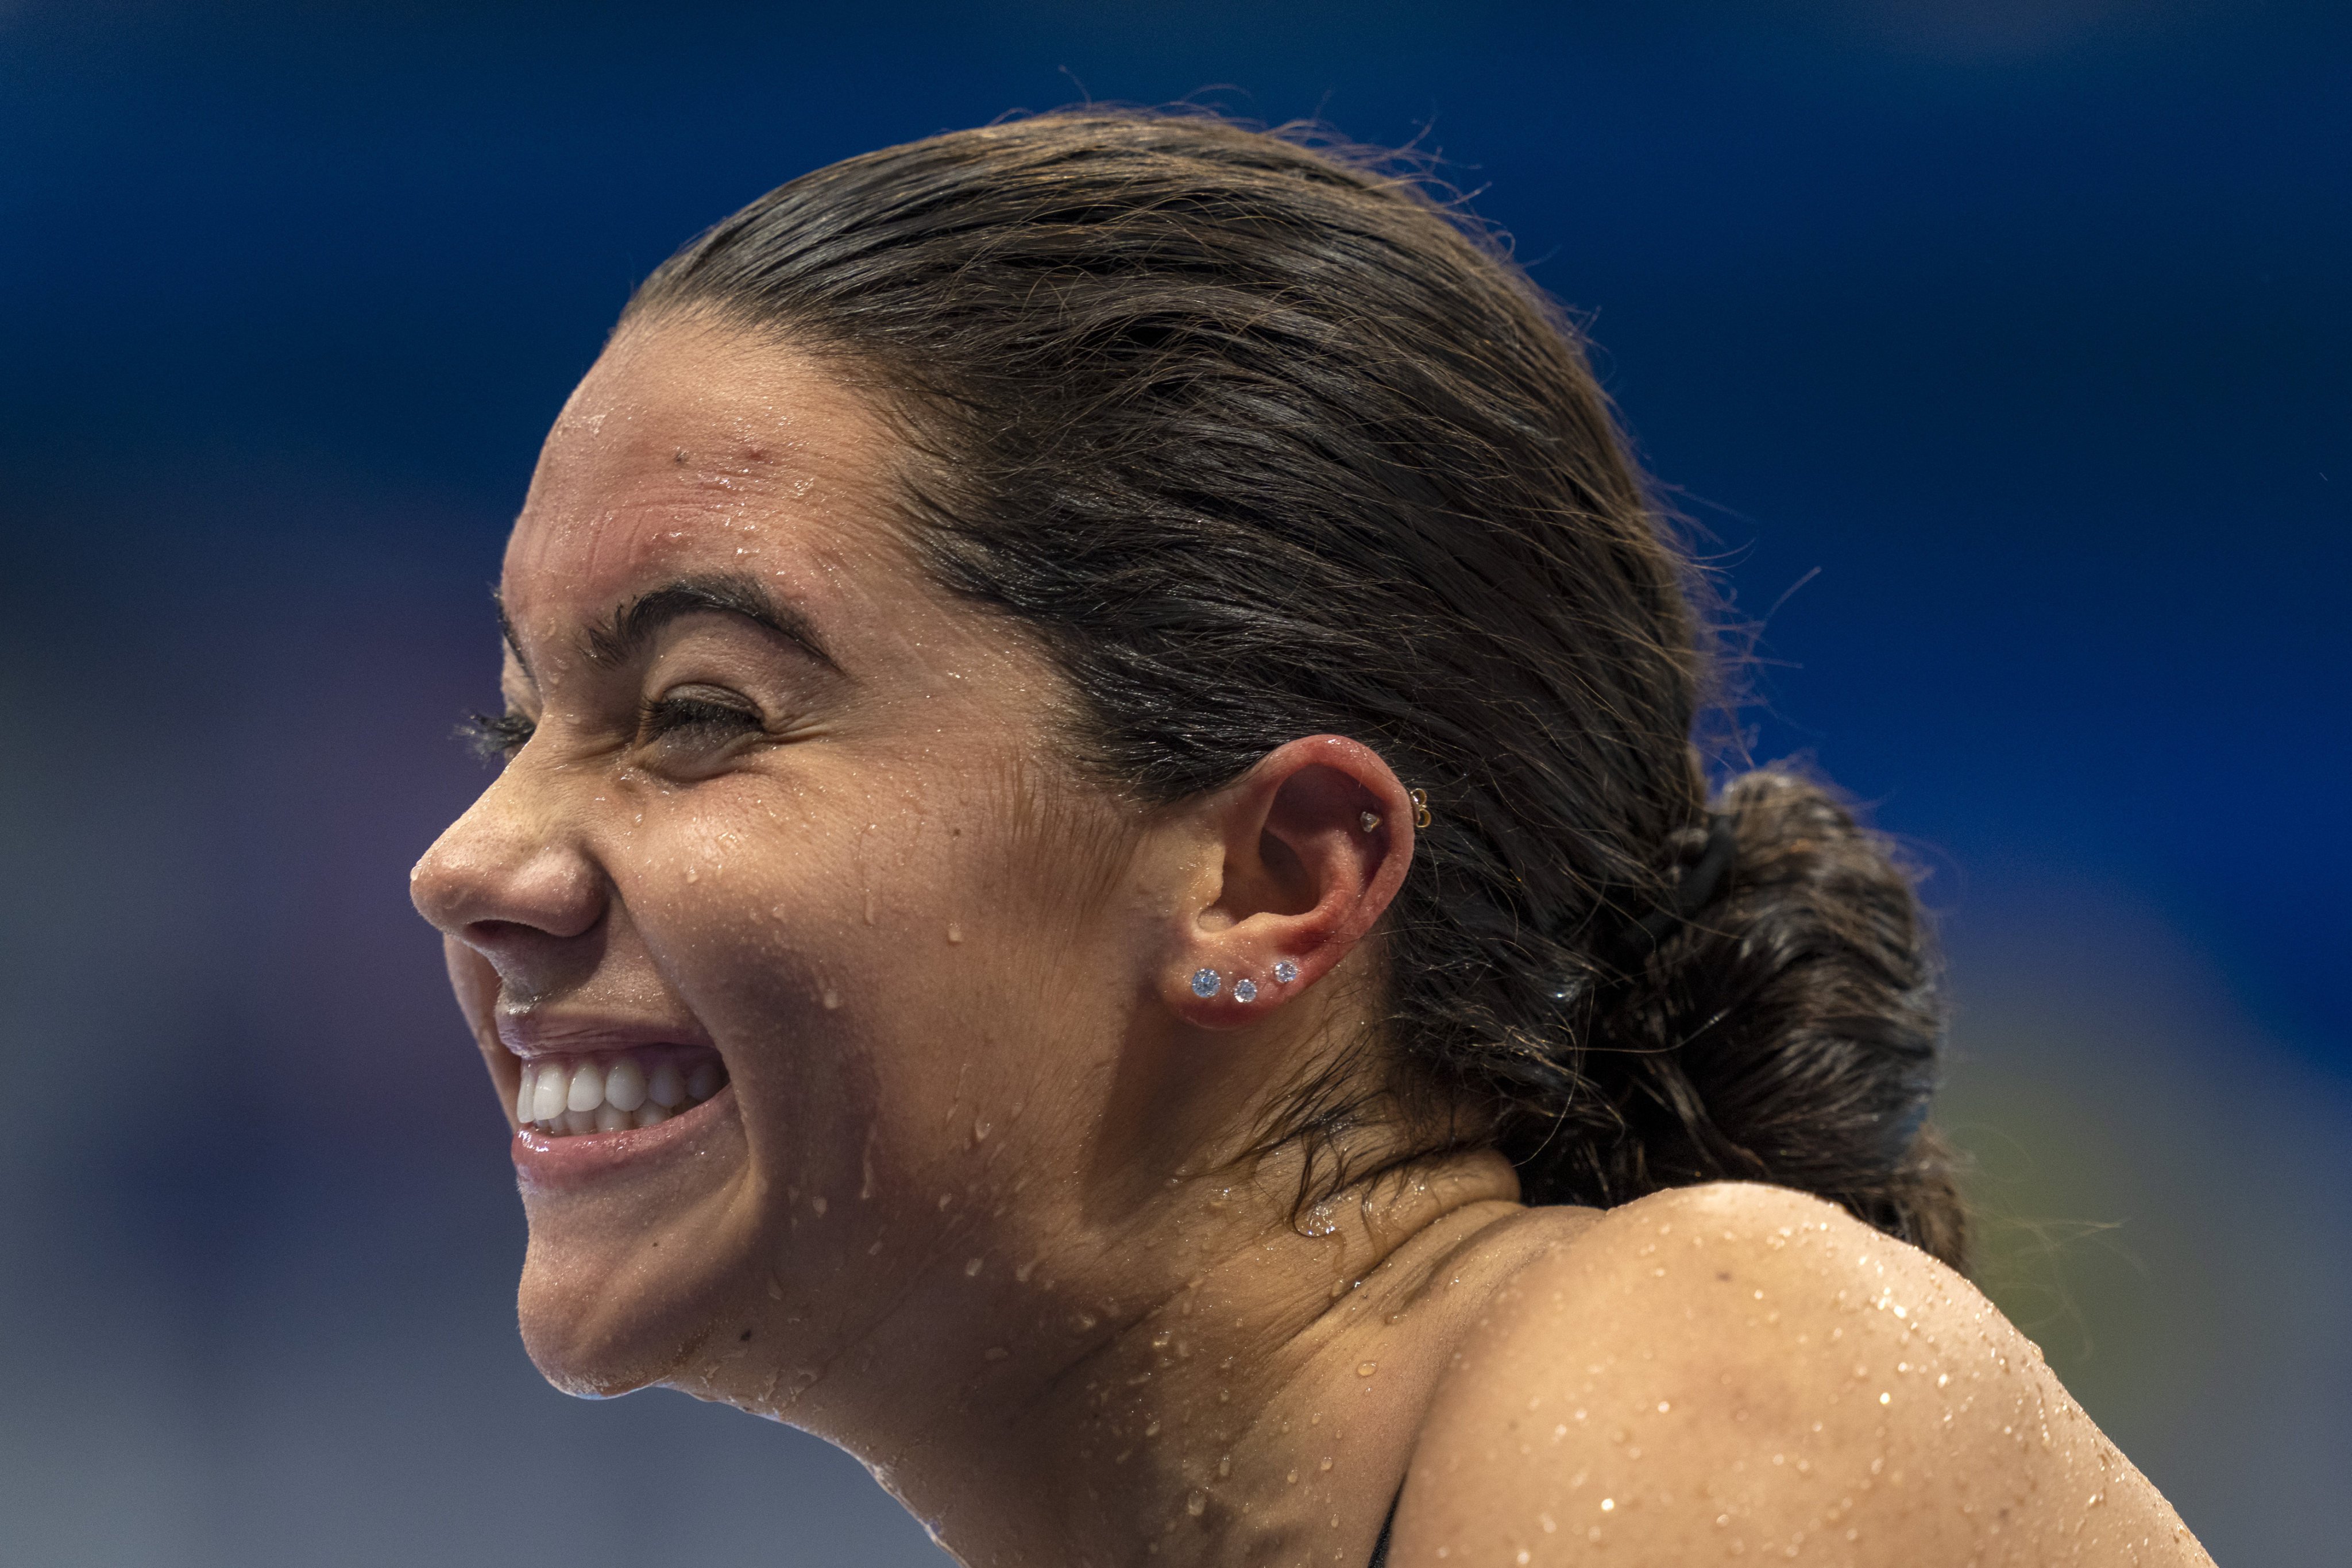 Anastasia Agonis, from the US, reacts after beating a record at the Women’s 400m Freestyle - S11 Heat 2 at the Tokyo Aquatics Centre during the Tokyo 2020 Paralympic Games. Photo: AP